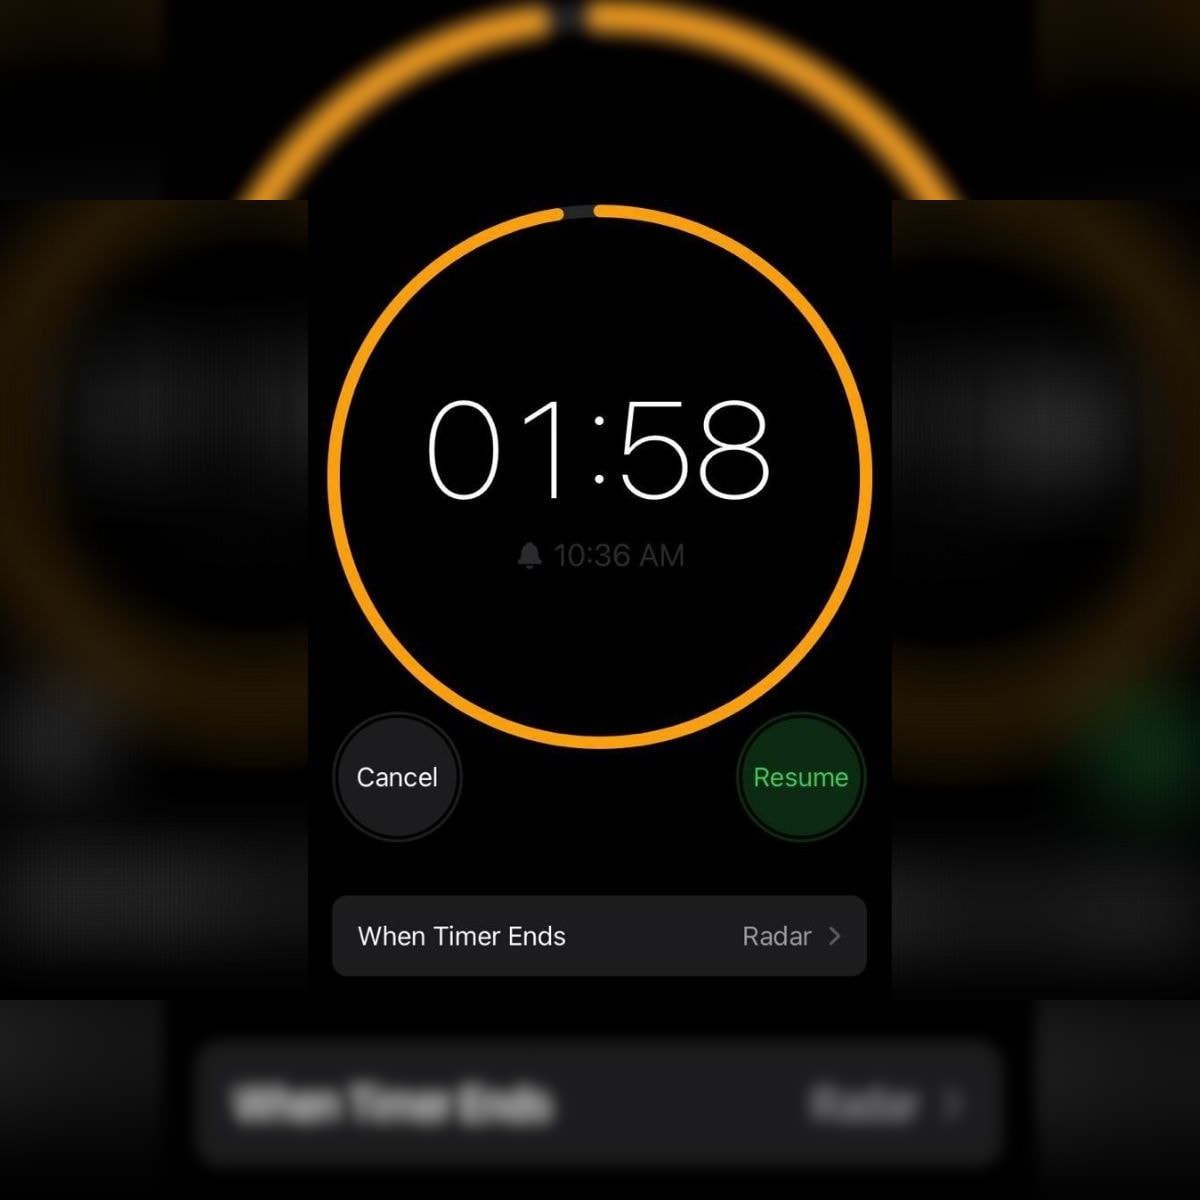 How to Use iPhone's Hidden Timer Feature to Music, Podcasts Automatically